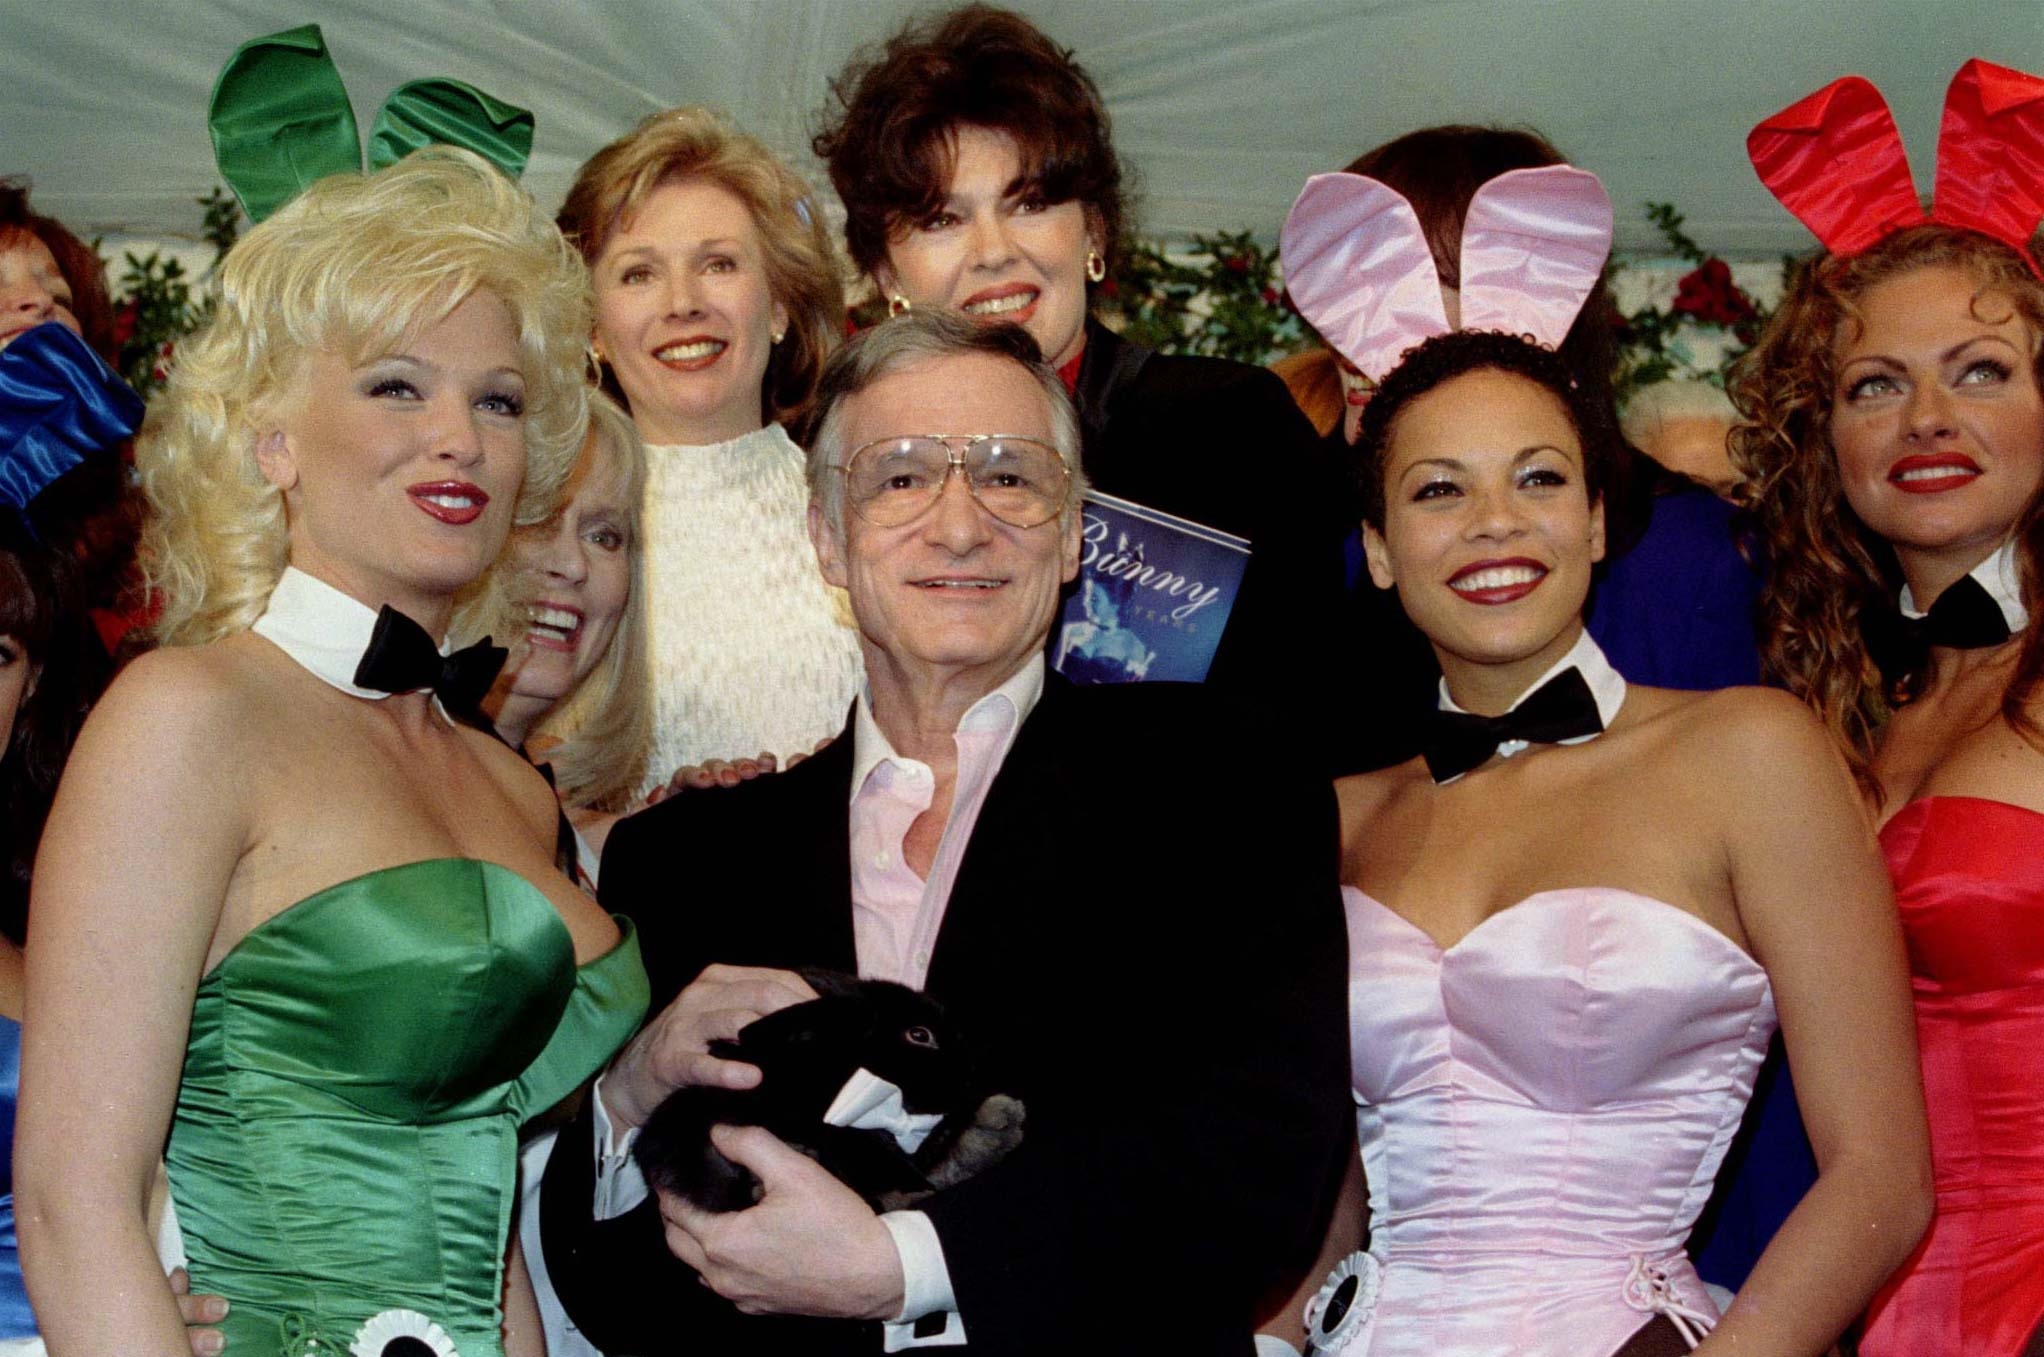 Hugh Hefner (C) , founder and publisher of Playboy magazine, is surrounded by former and present Playmates, as he holds a pet rabbit given to him for his 72nd birthday, April 9, at the Playboy Mansion in Los Angeles. Hefner was a struggling young magazine copywriter in 1953 when he turned a $600 investment and a picture of Marilyn Monroe into one of the most successful publishing empires in history. - RTXIFAD